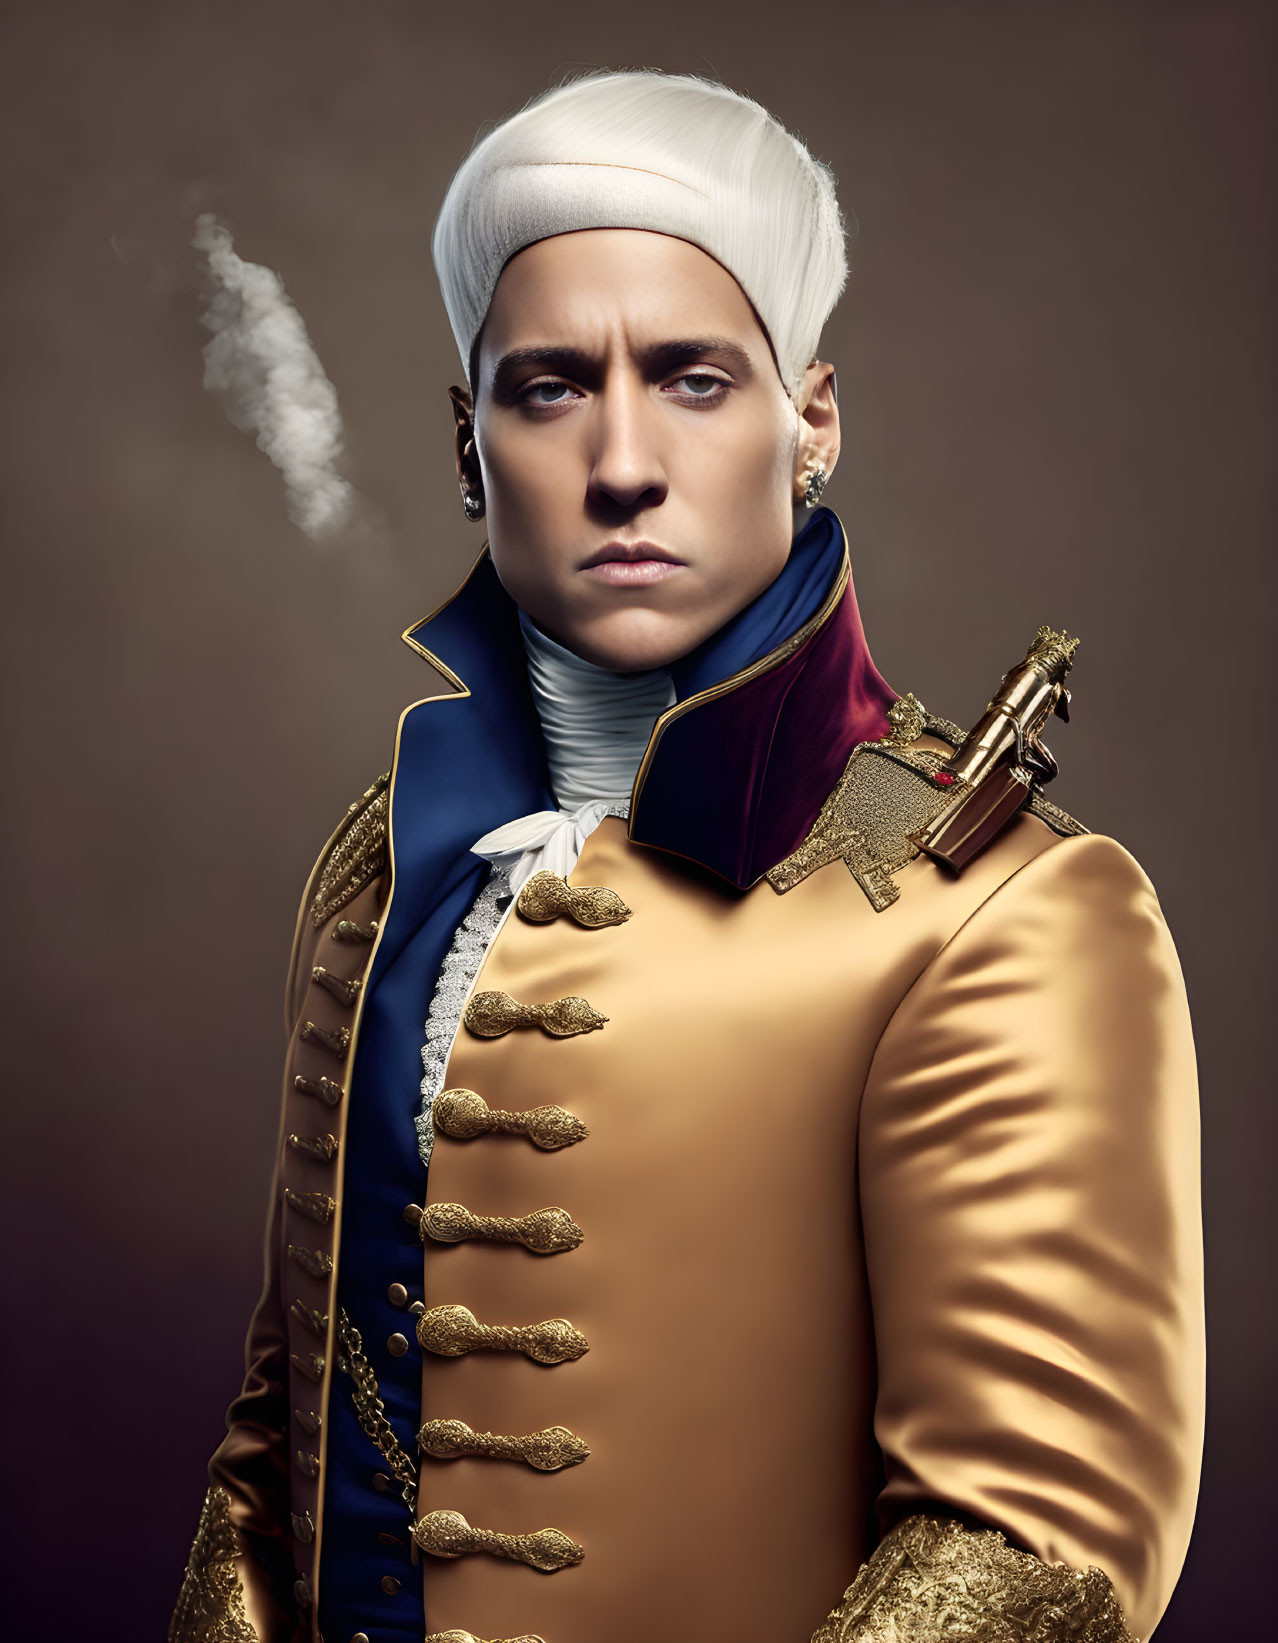 Historical military uniform portrait with intense gaze and smoking pipe